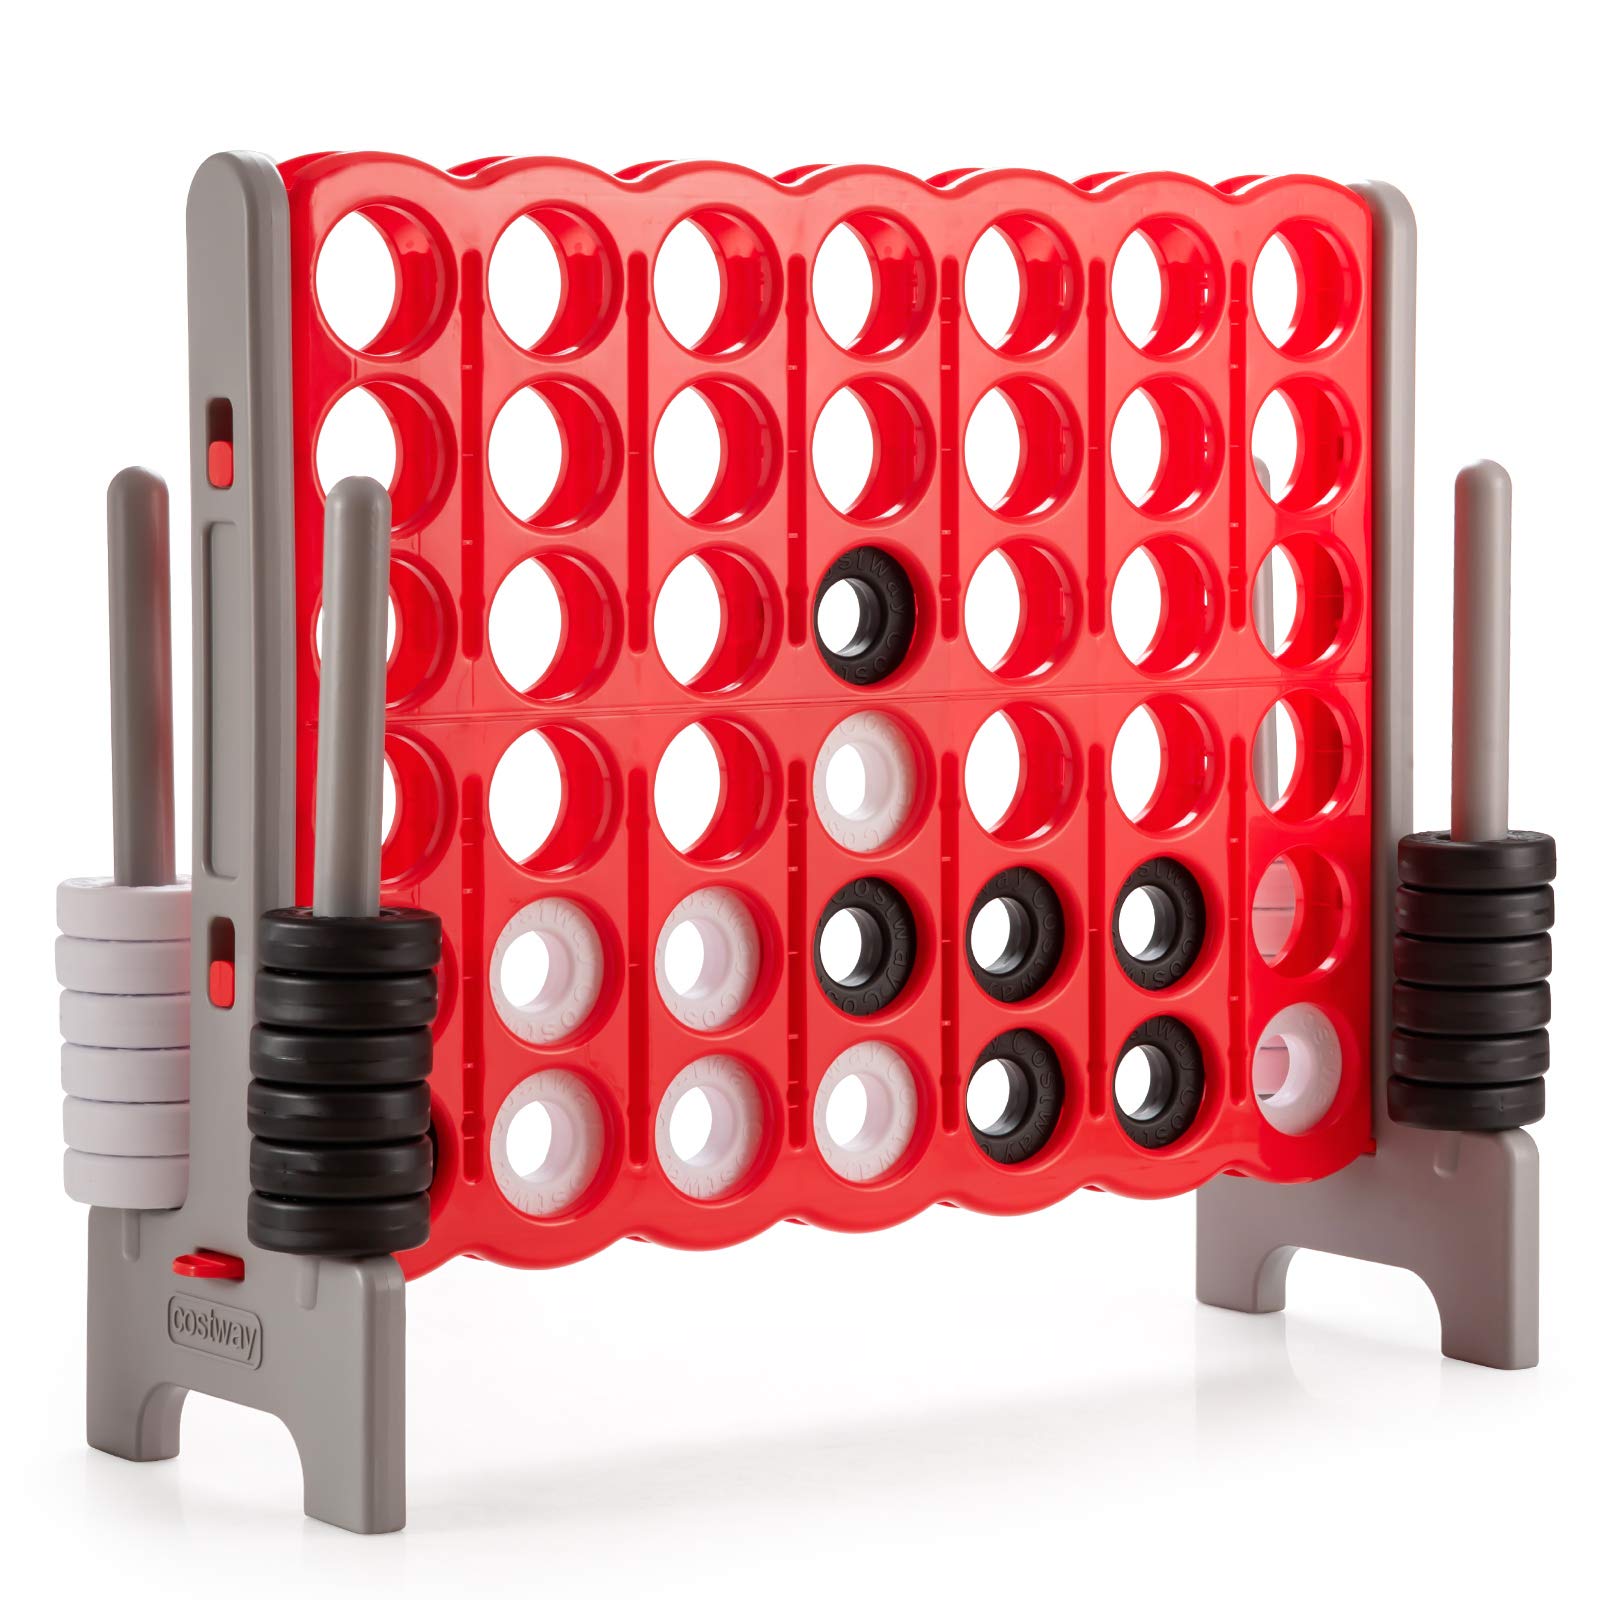 COSTWAY Jumbo 4-to-Score Giant Game Set, 4 in A Row for Kids and Adults, 3.5FT Tall Indoor & Outdoor Game Set with 42 Jumbo Rings & Quick-Release Slider, Perfect for Holiday Party & Family Game